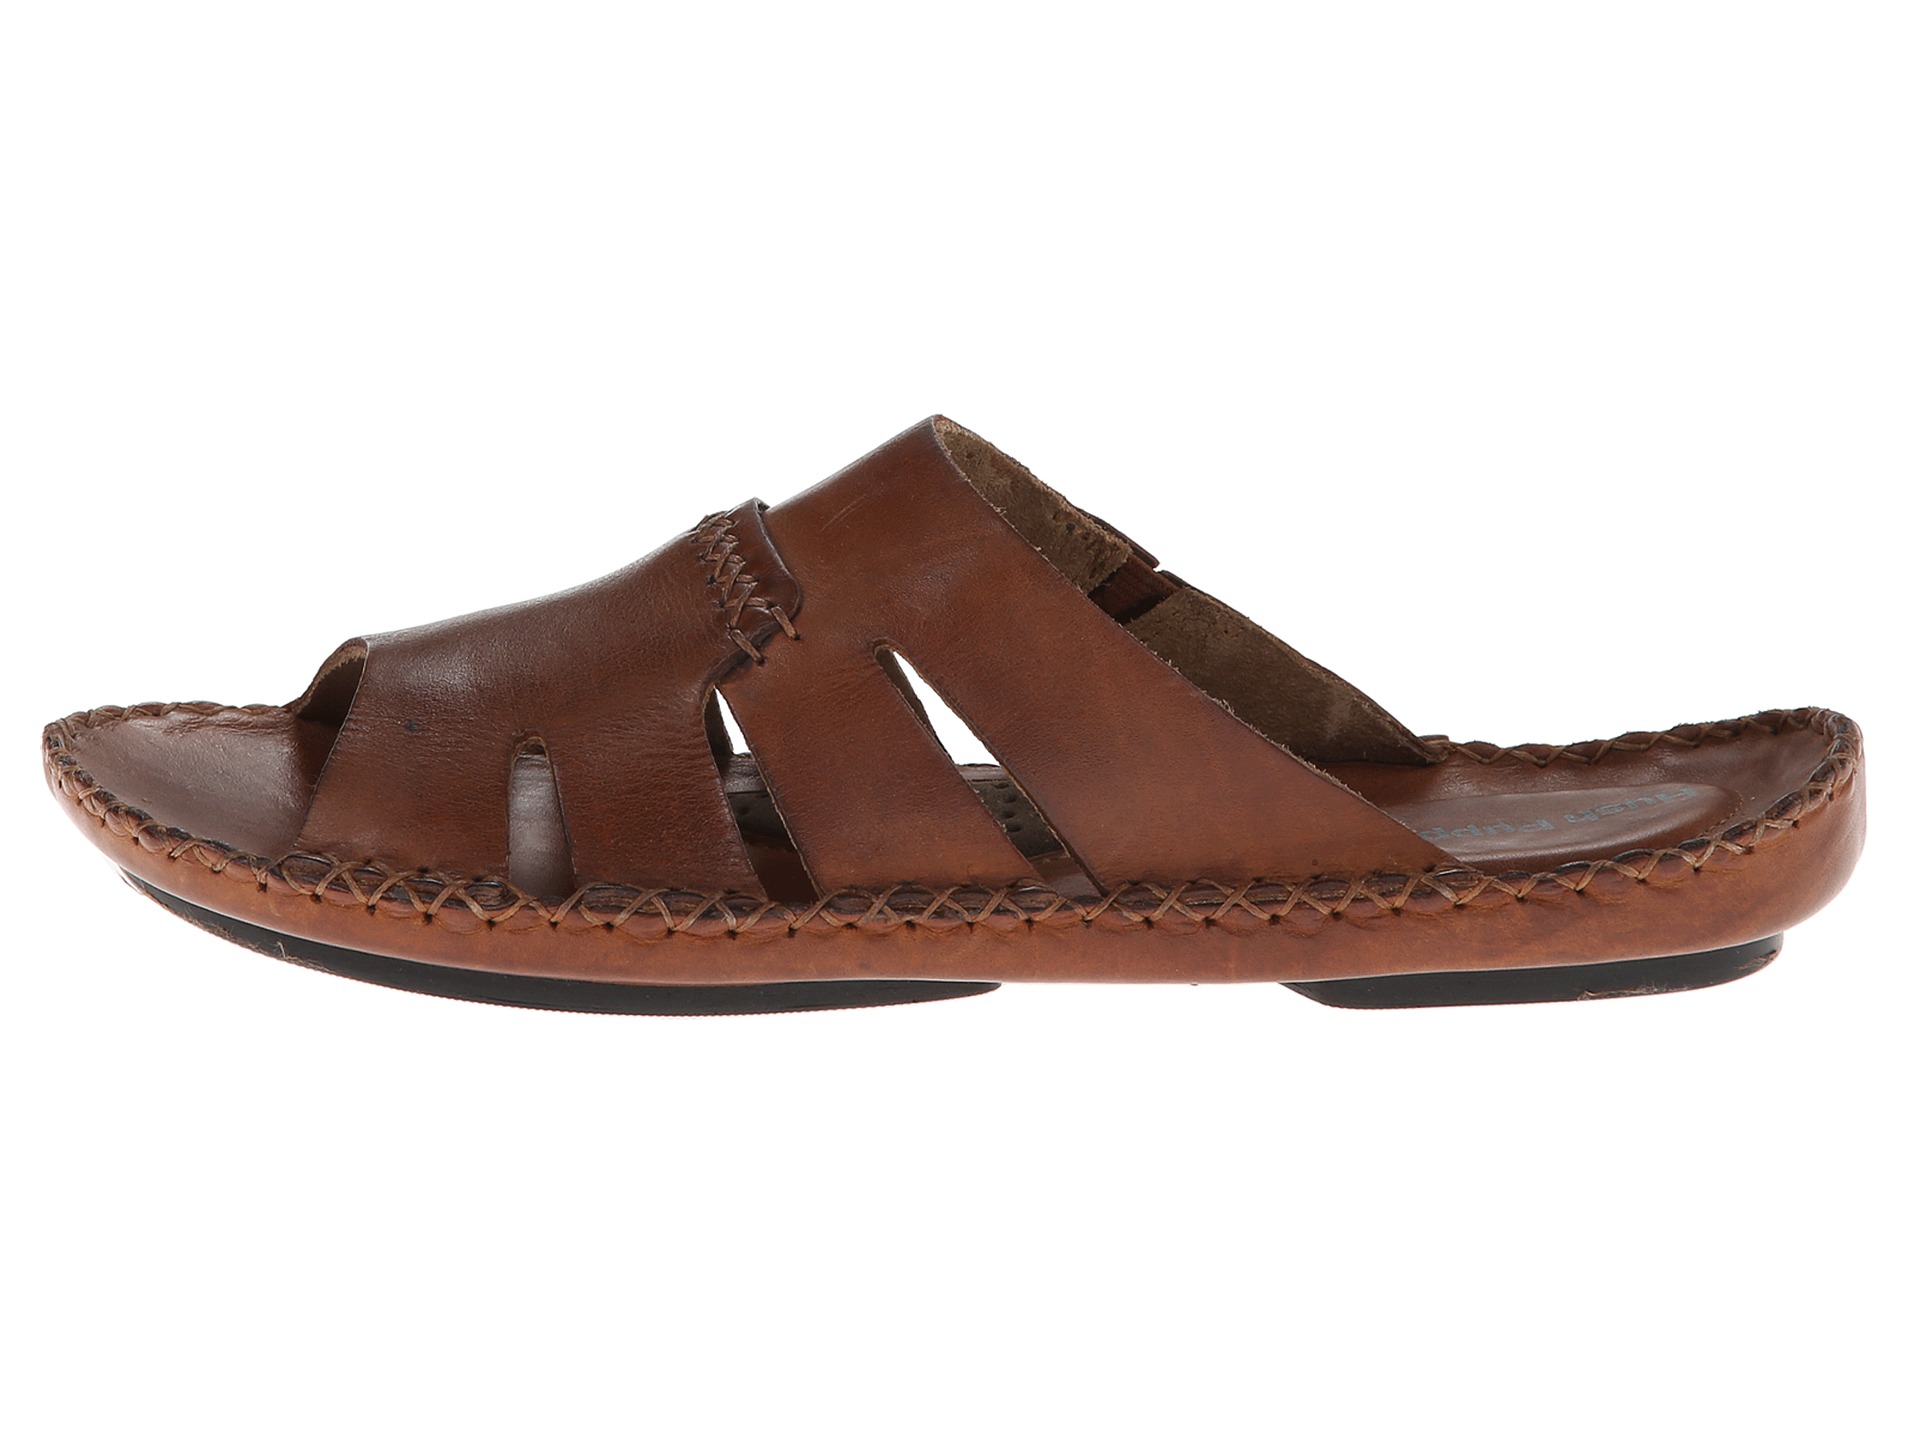 Hush Puppies Morocco Slide Ii Tan Leather | Shipped Free at Zappos